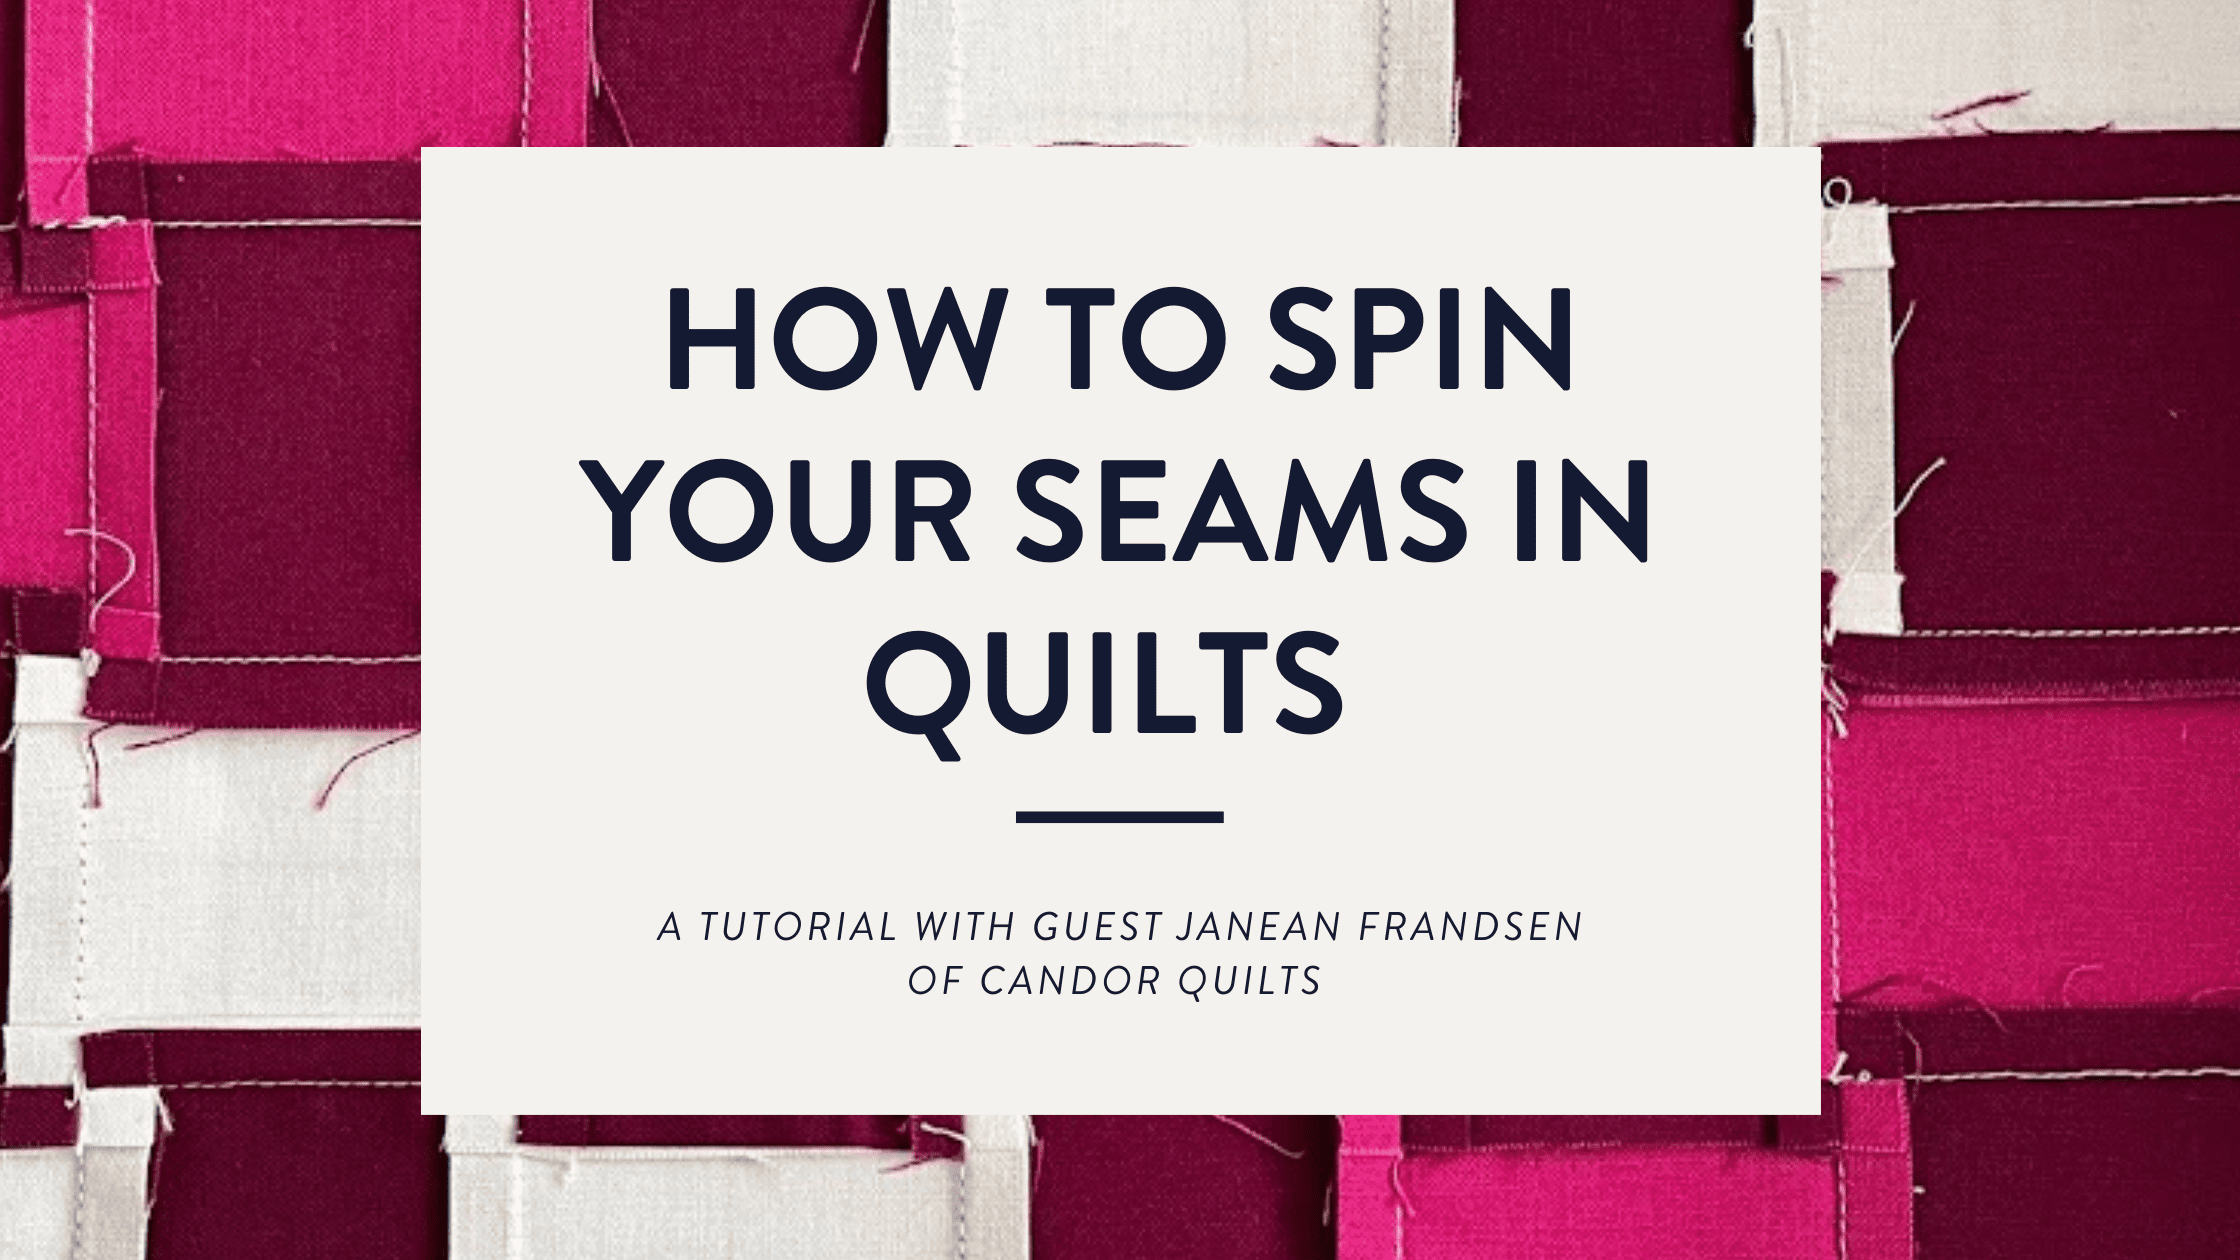 How to Spin Your Seams in Quilts